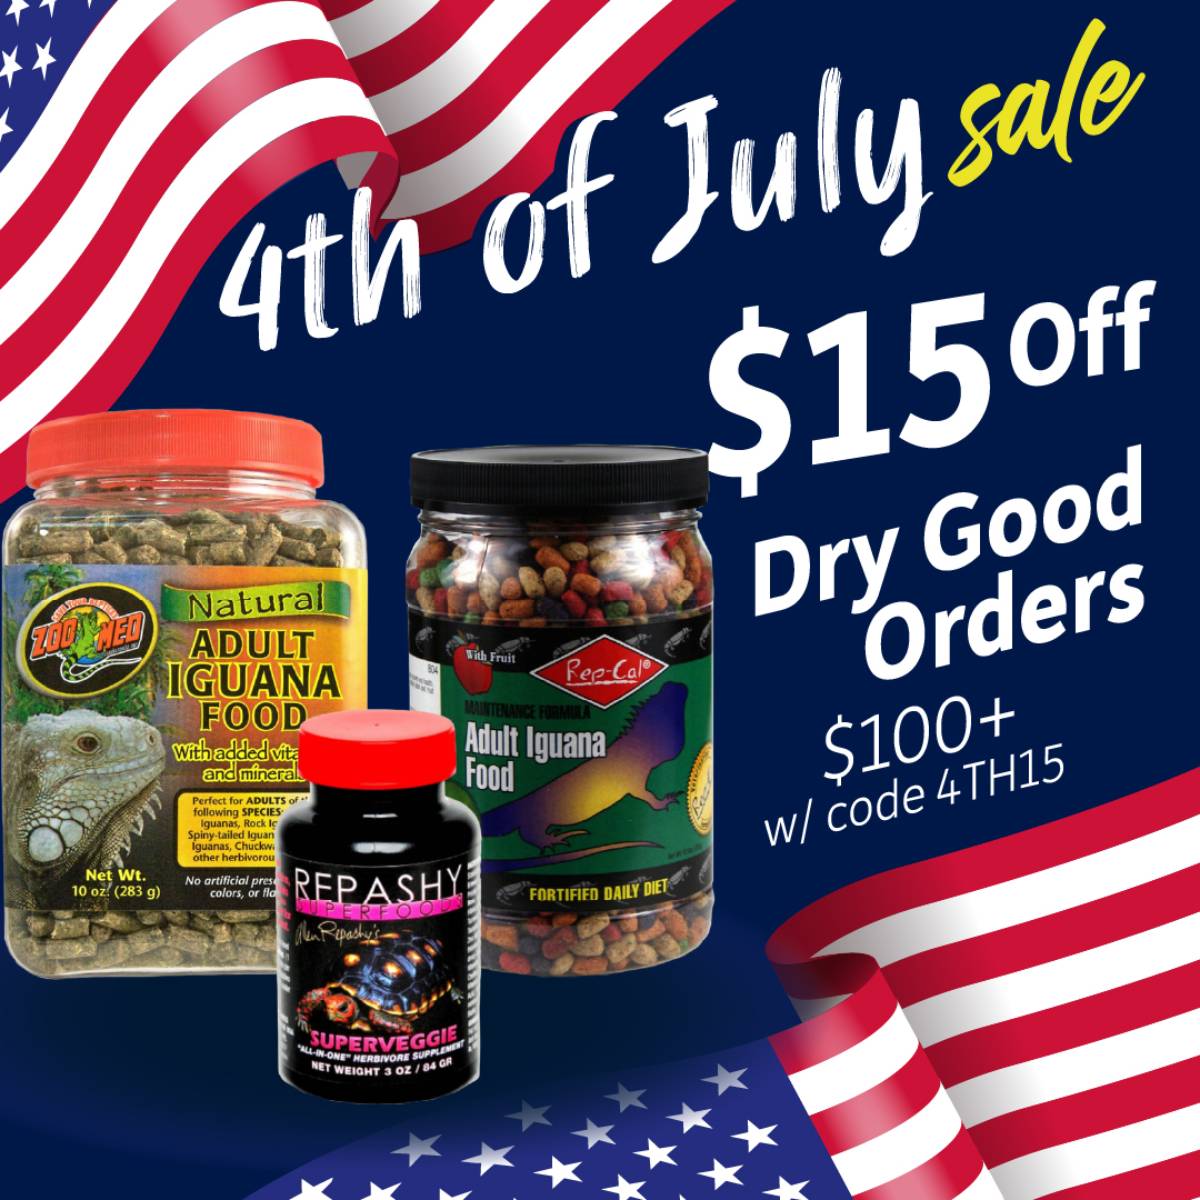 Save $15 on $100+ or more of dry goods.